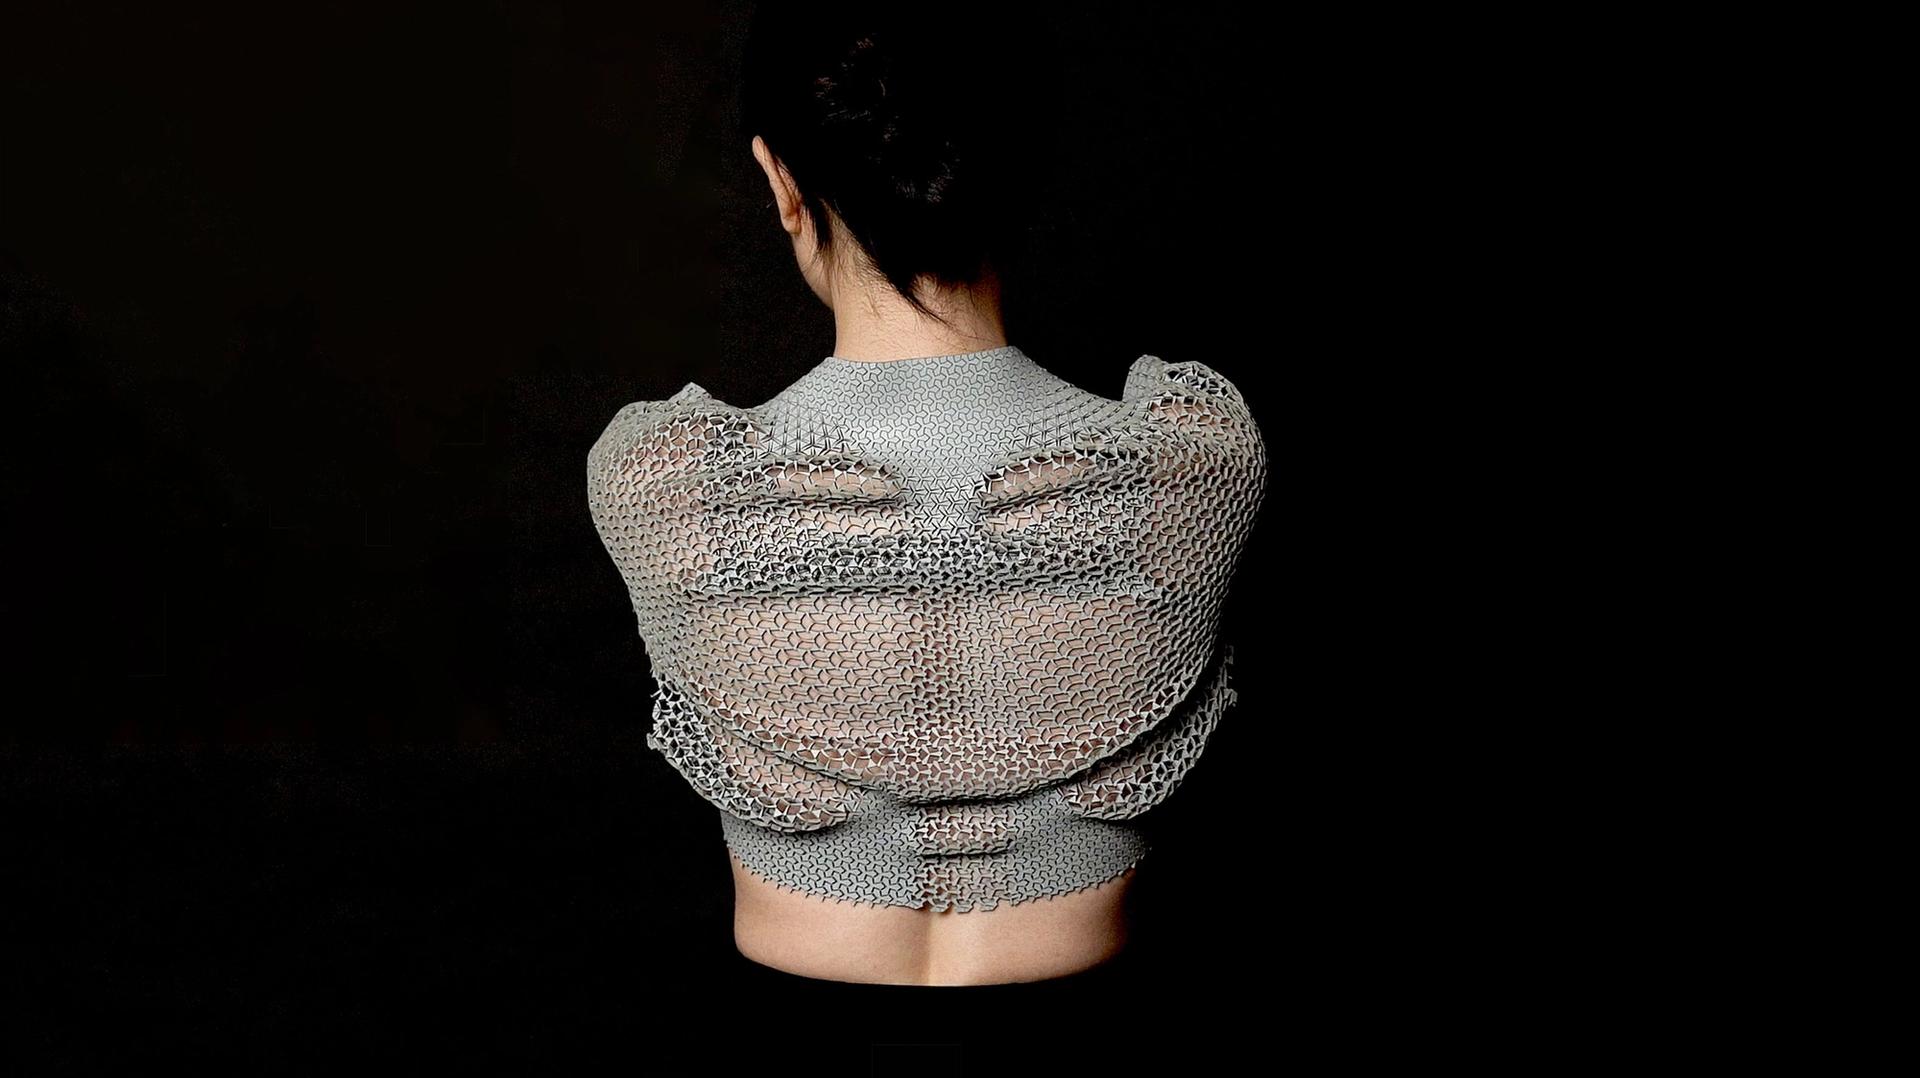 Photograph of a female figure, back to camera, with grey geometric cutout mesh top, black background